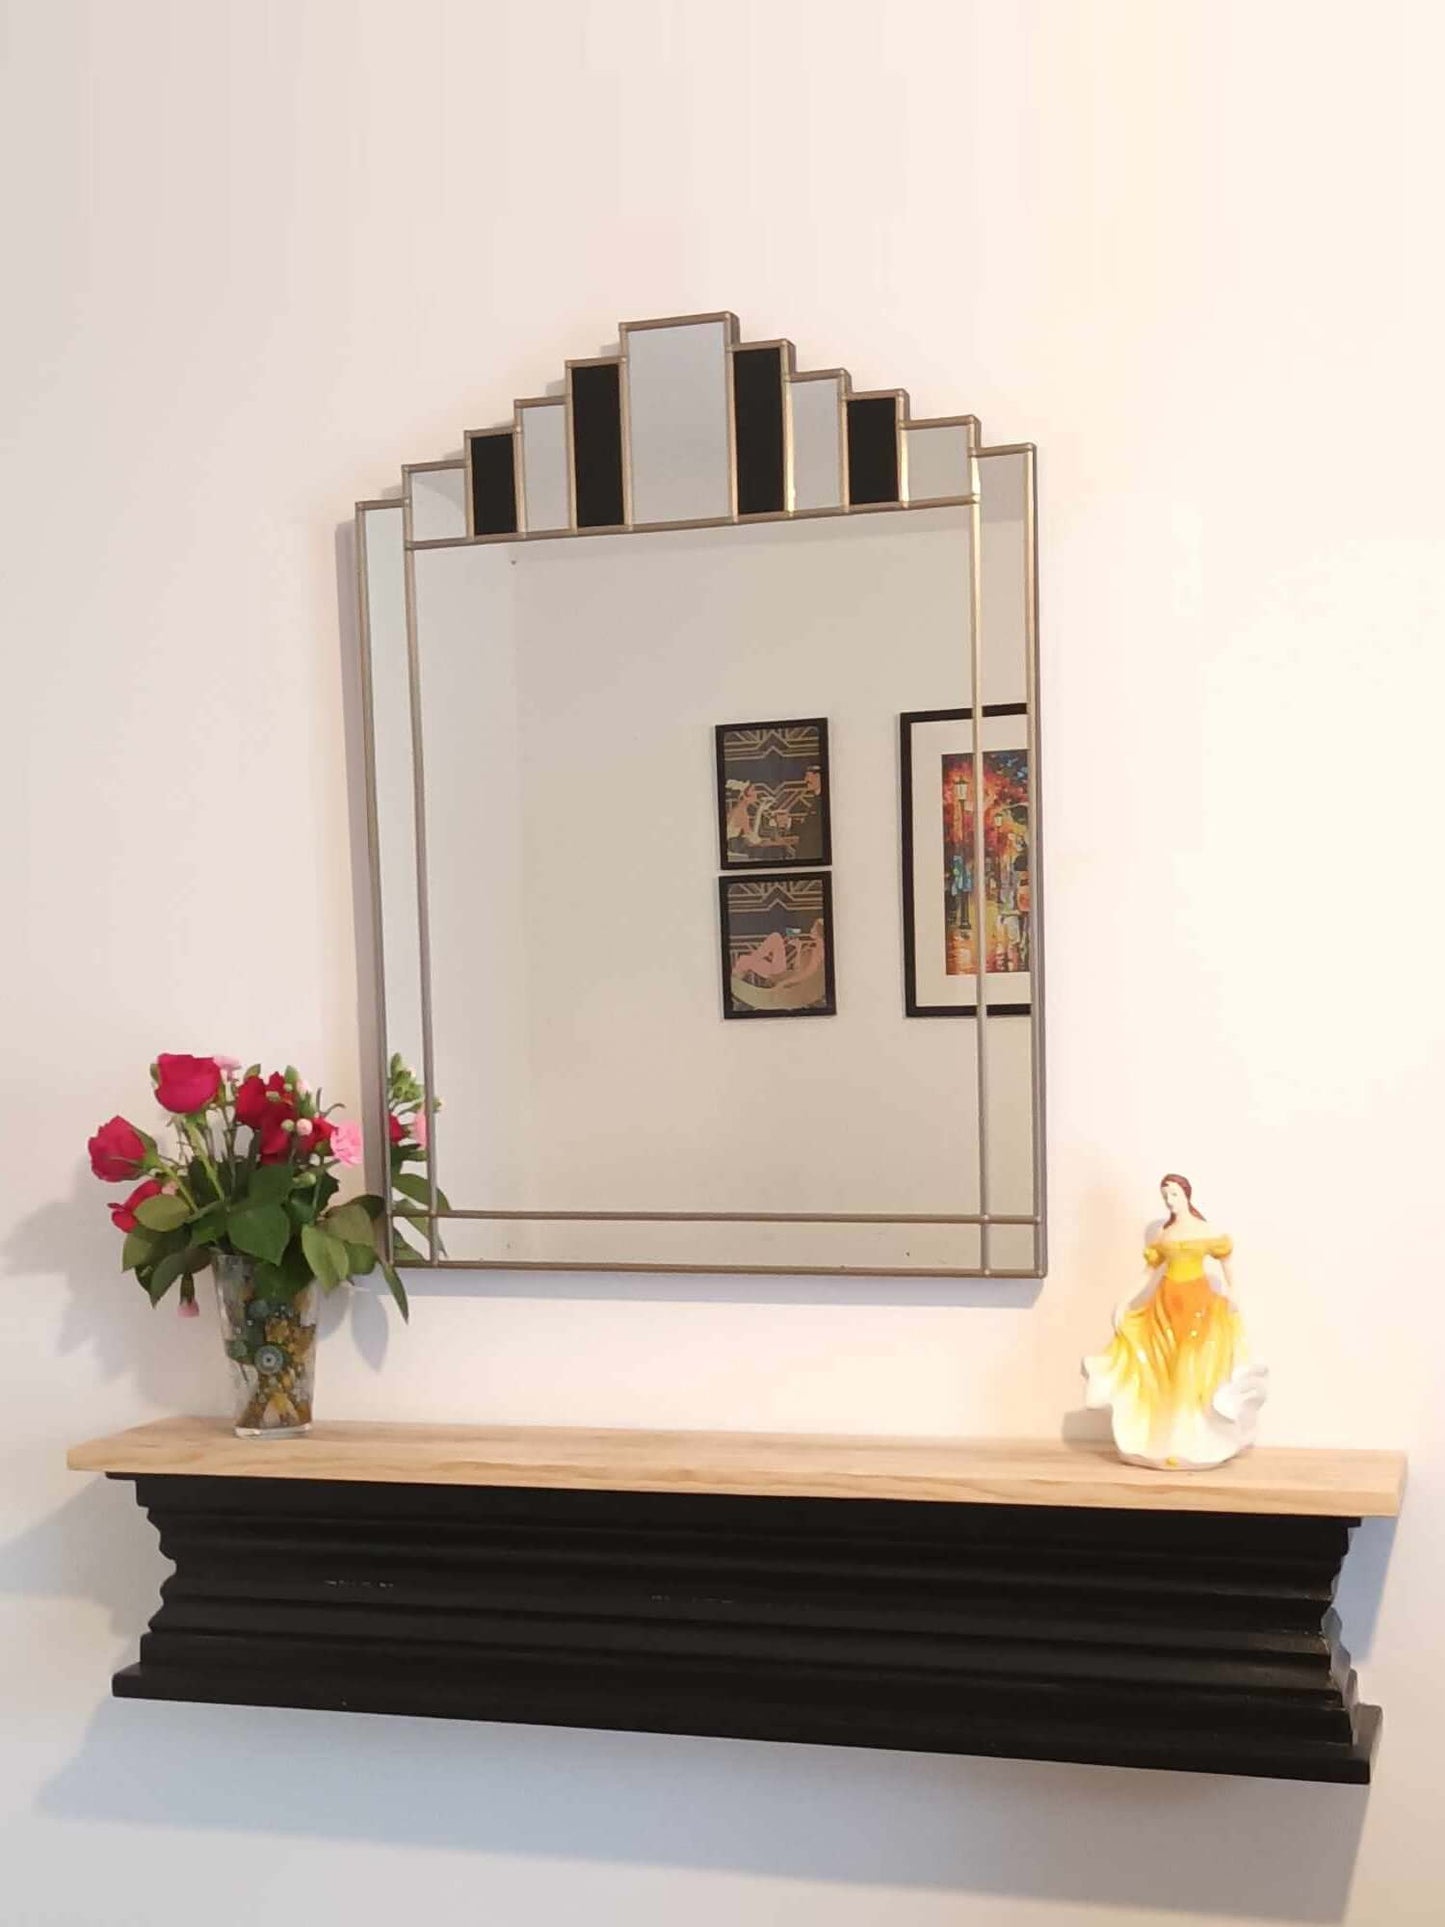 Gold Art Deco Wall Mirror Made in the UK  Exclusive JPC Mirrors Art Deco Mirror